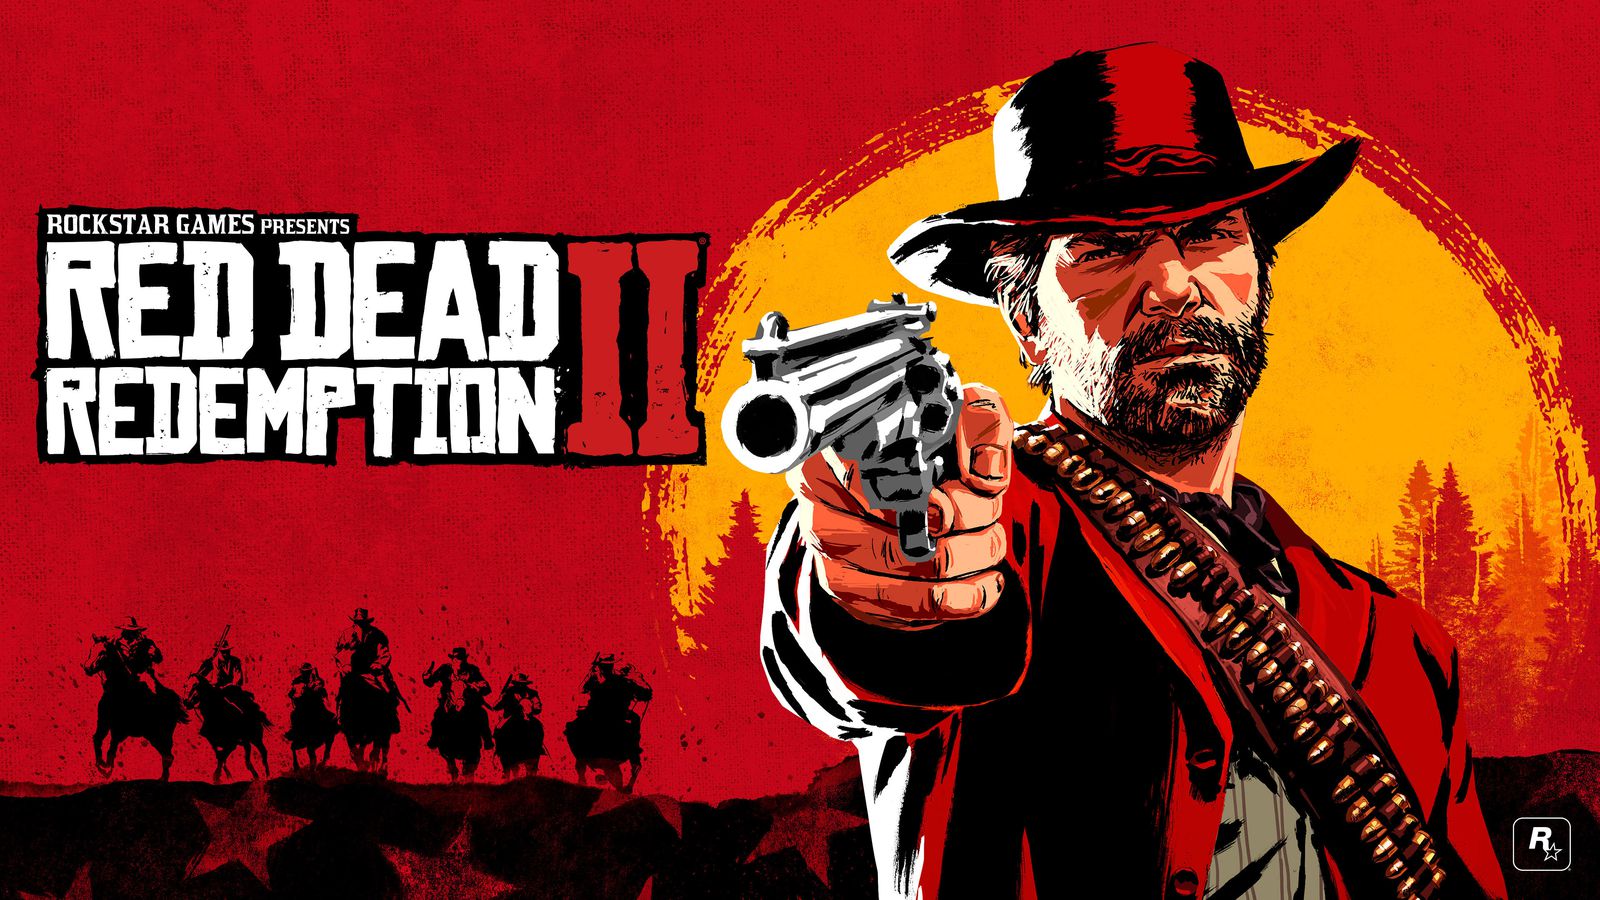 ‘Red Dead Redemption 2’ To Have Largest Map By Rockstar